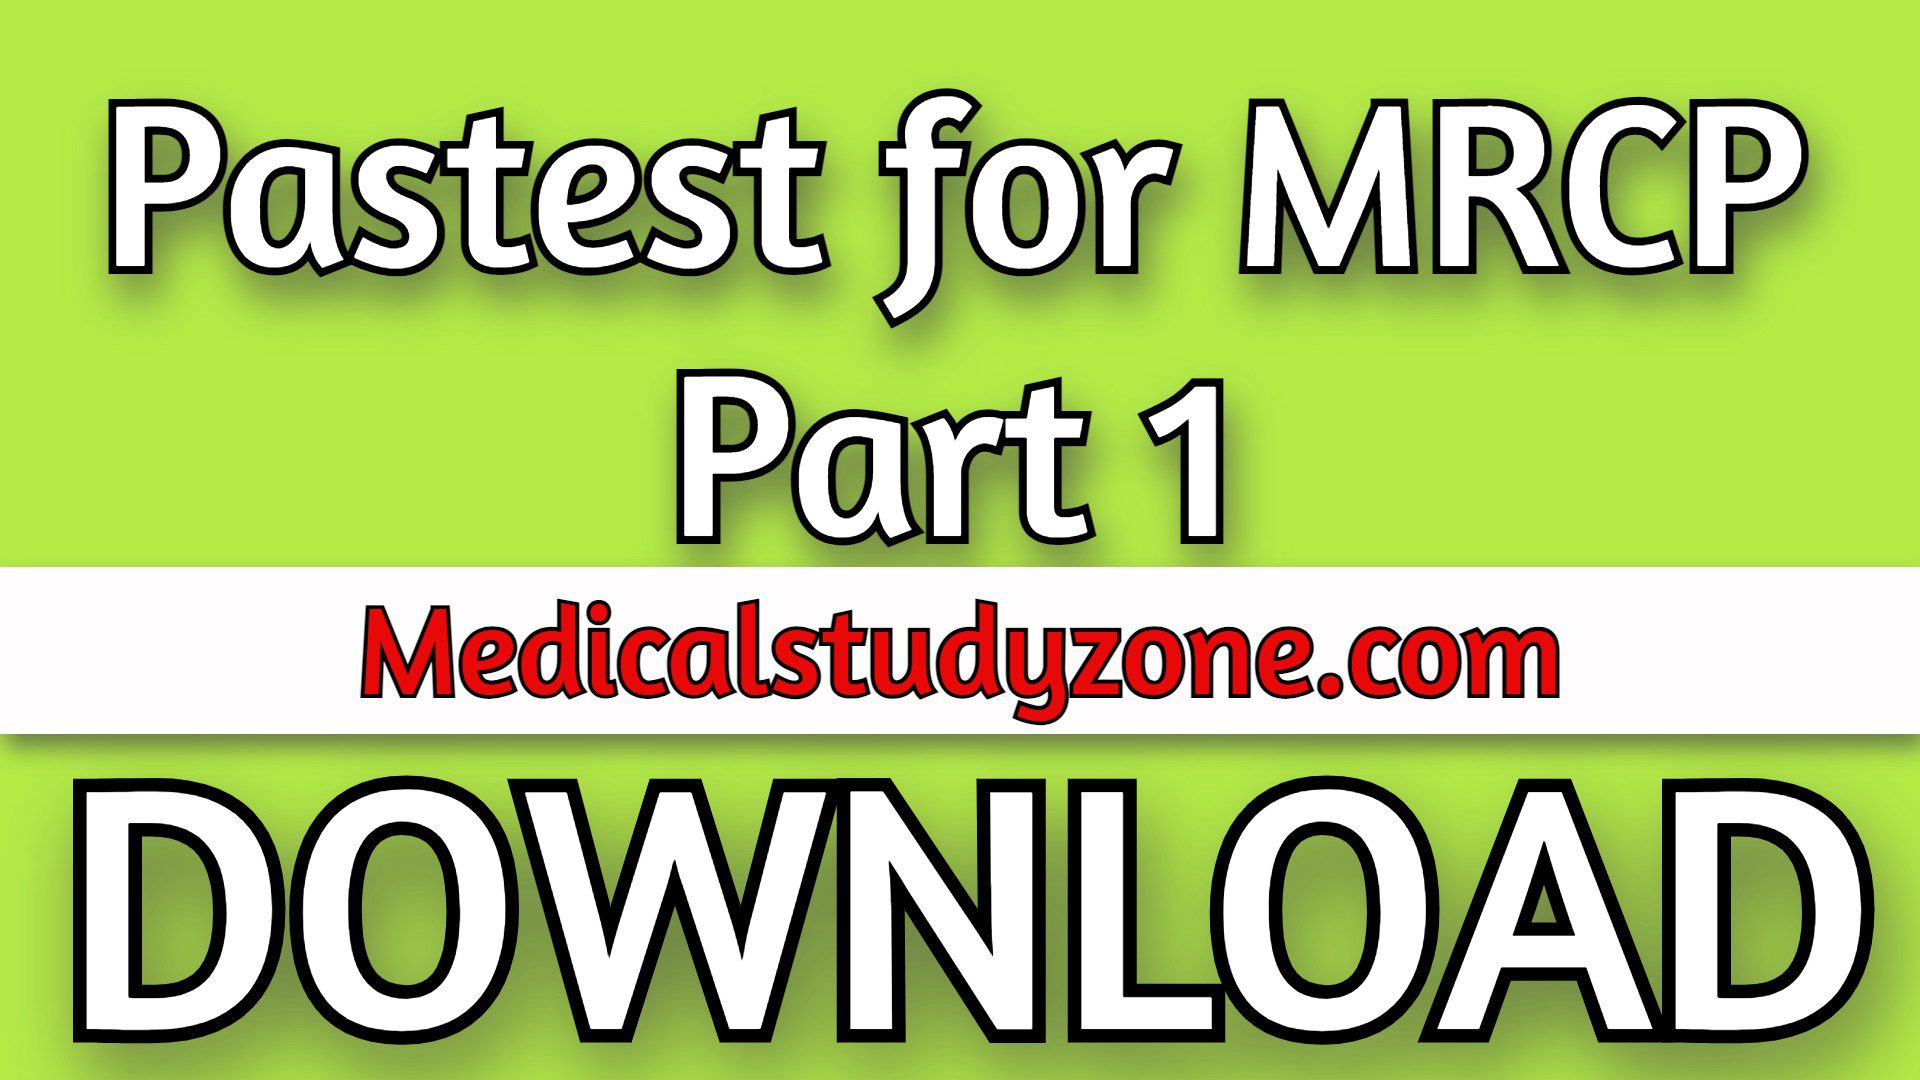 Pastest for MRCP Part 1 2021 PDF Free Download